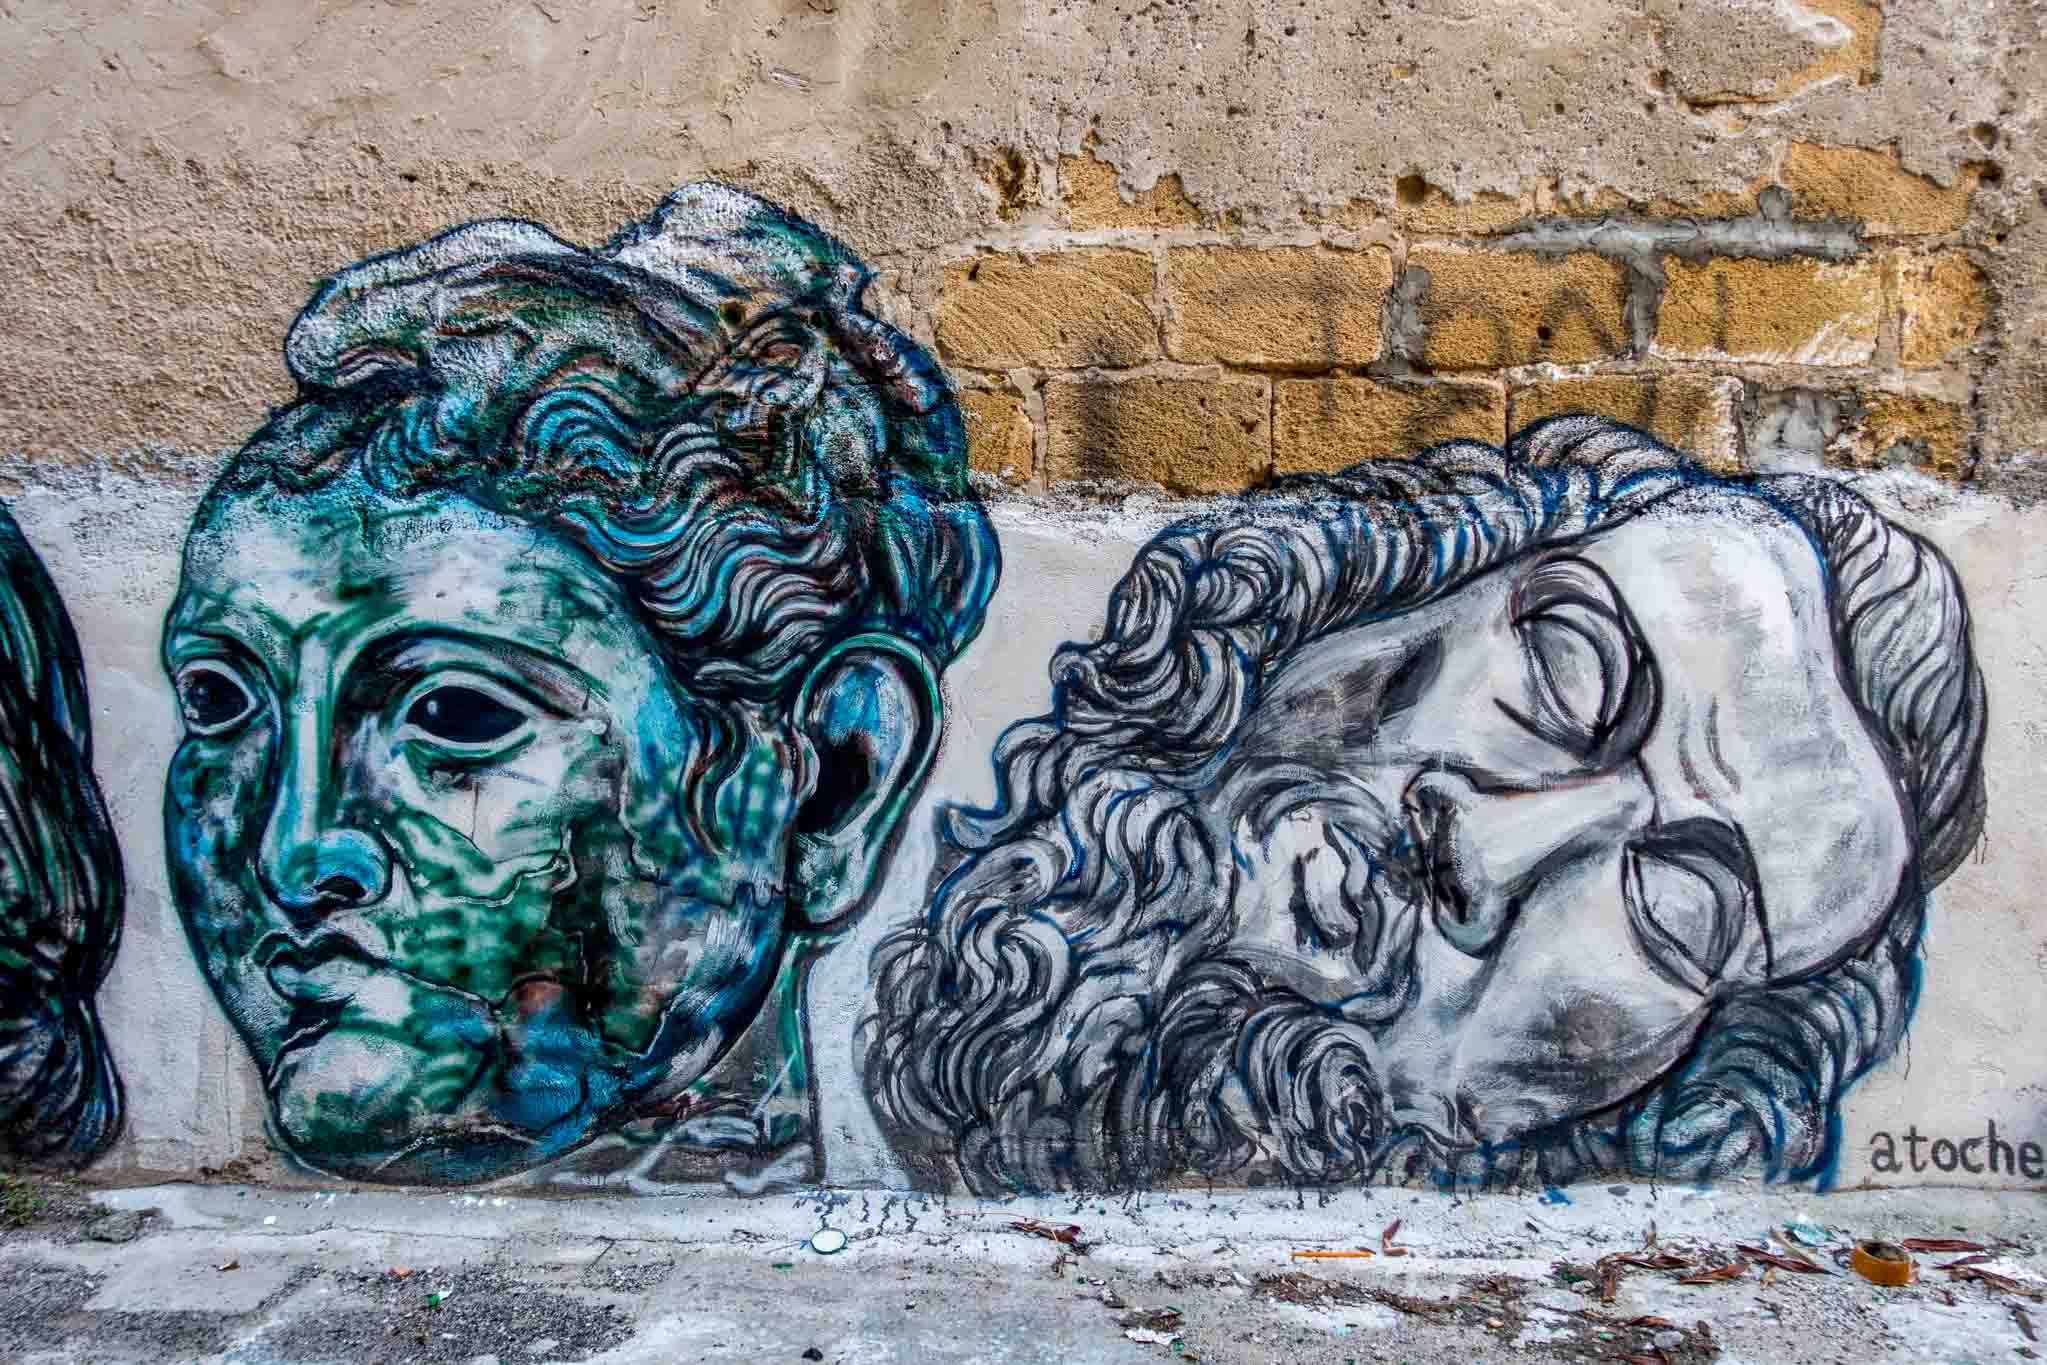 Two heads in a street art mural signed by artist Atoche.